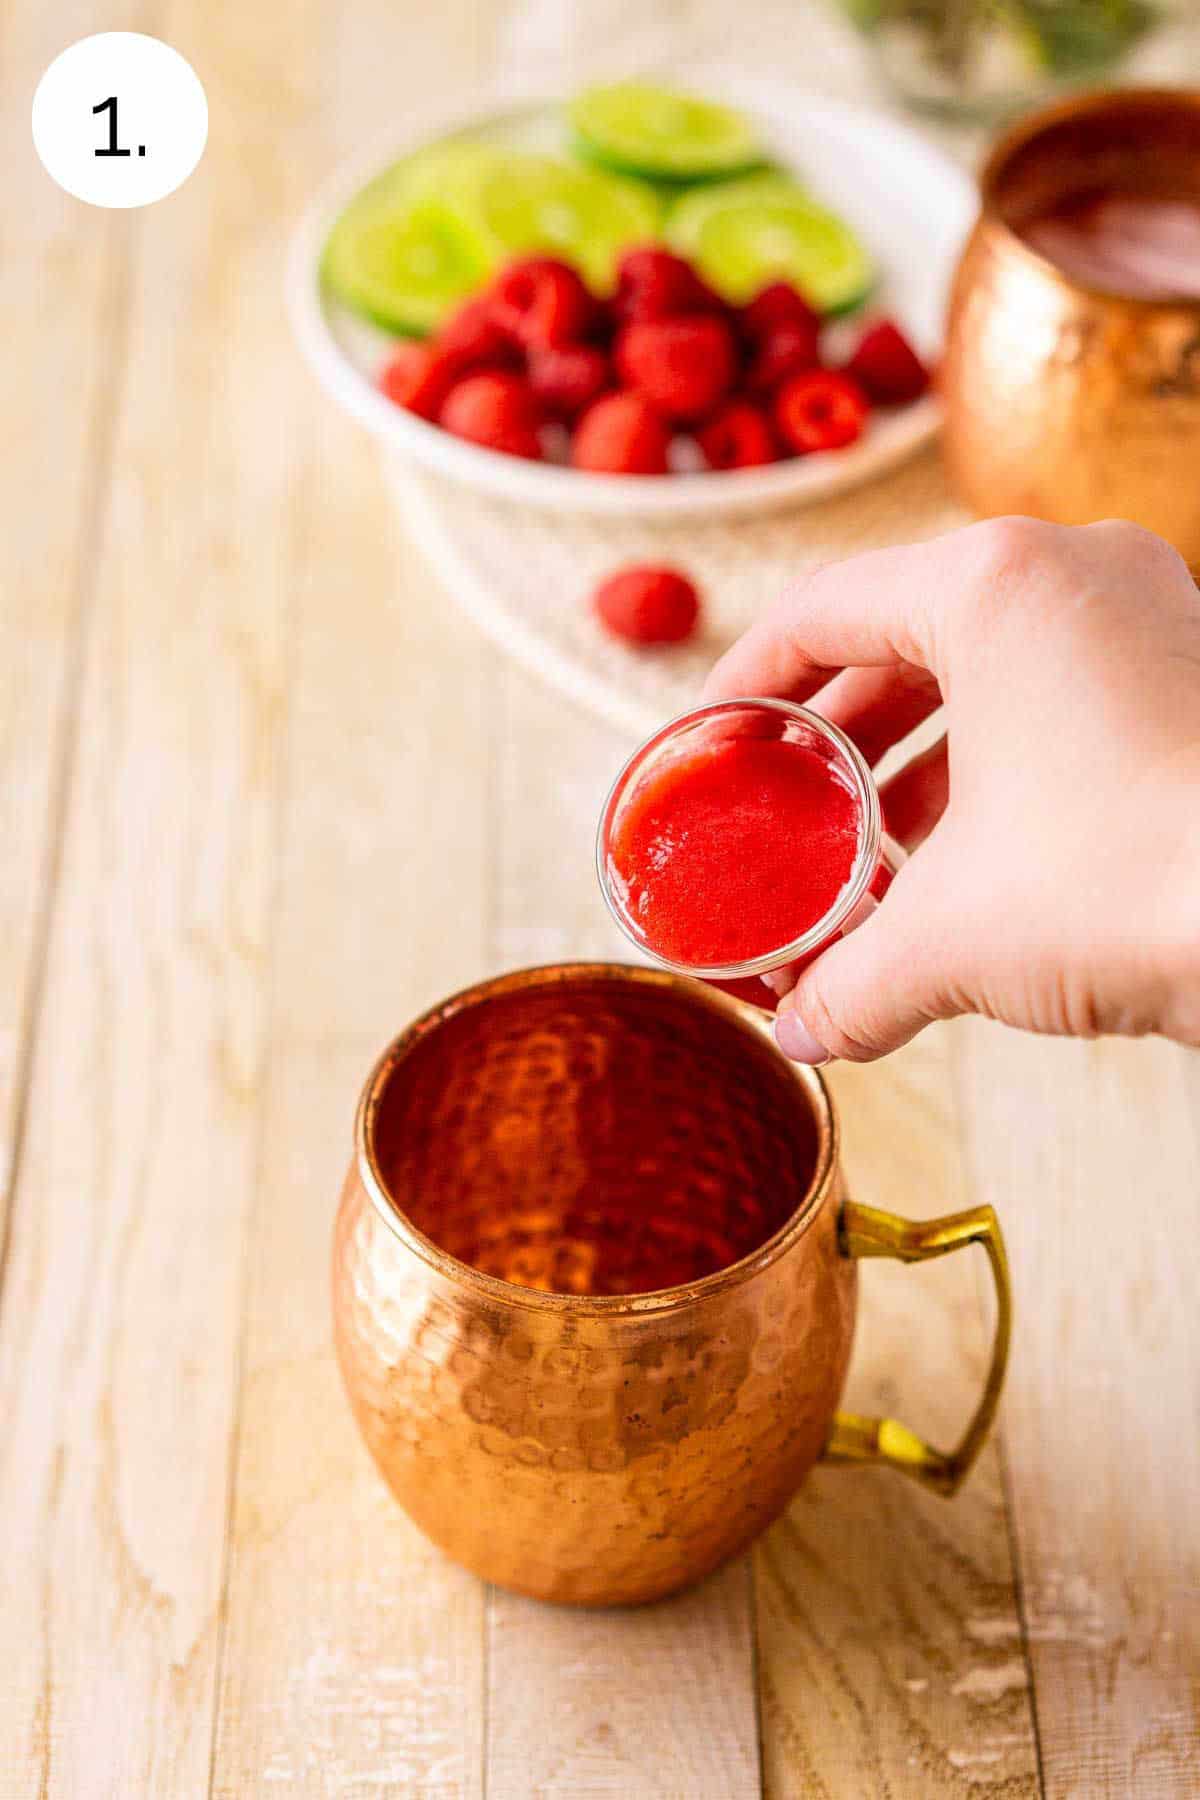 A hand pouring the raspberry purée into a copper mug on a cream-colored wooden board to start mixing the drink.